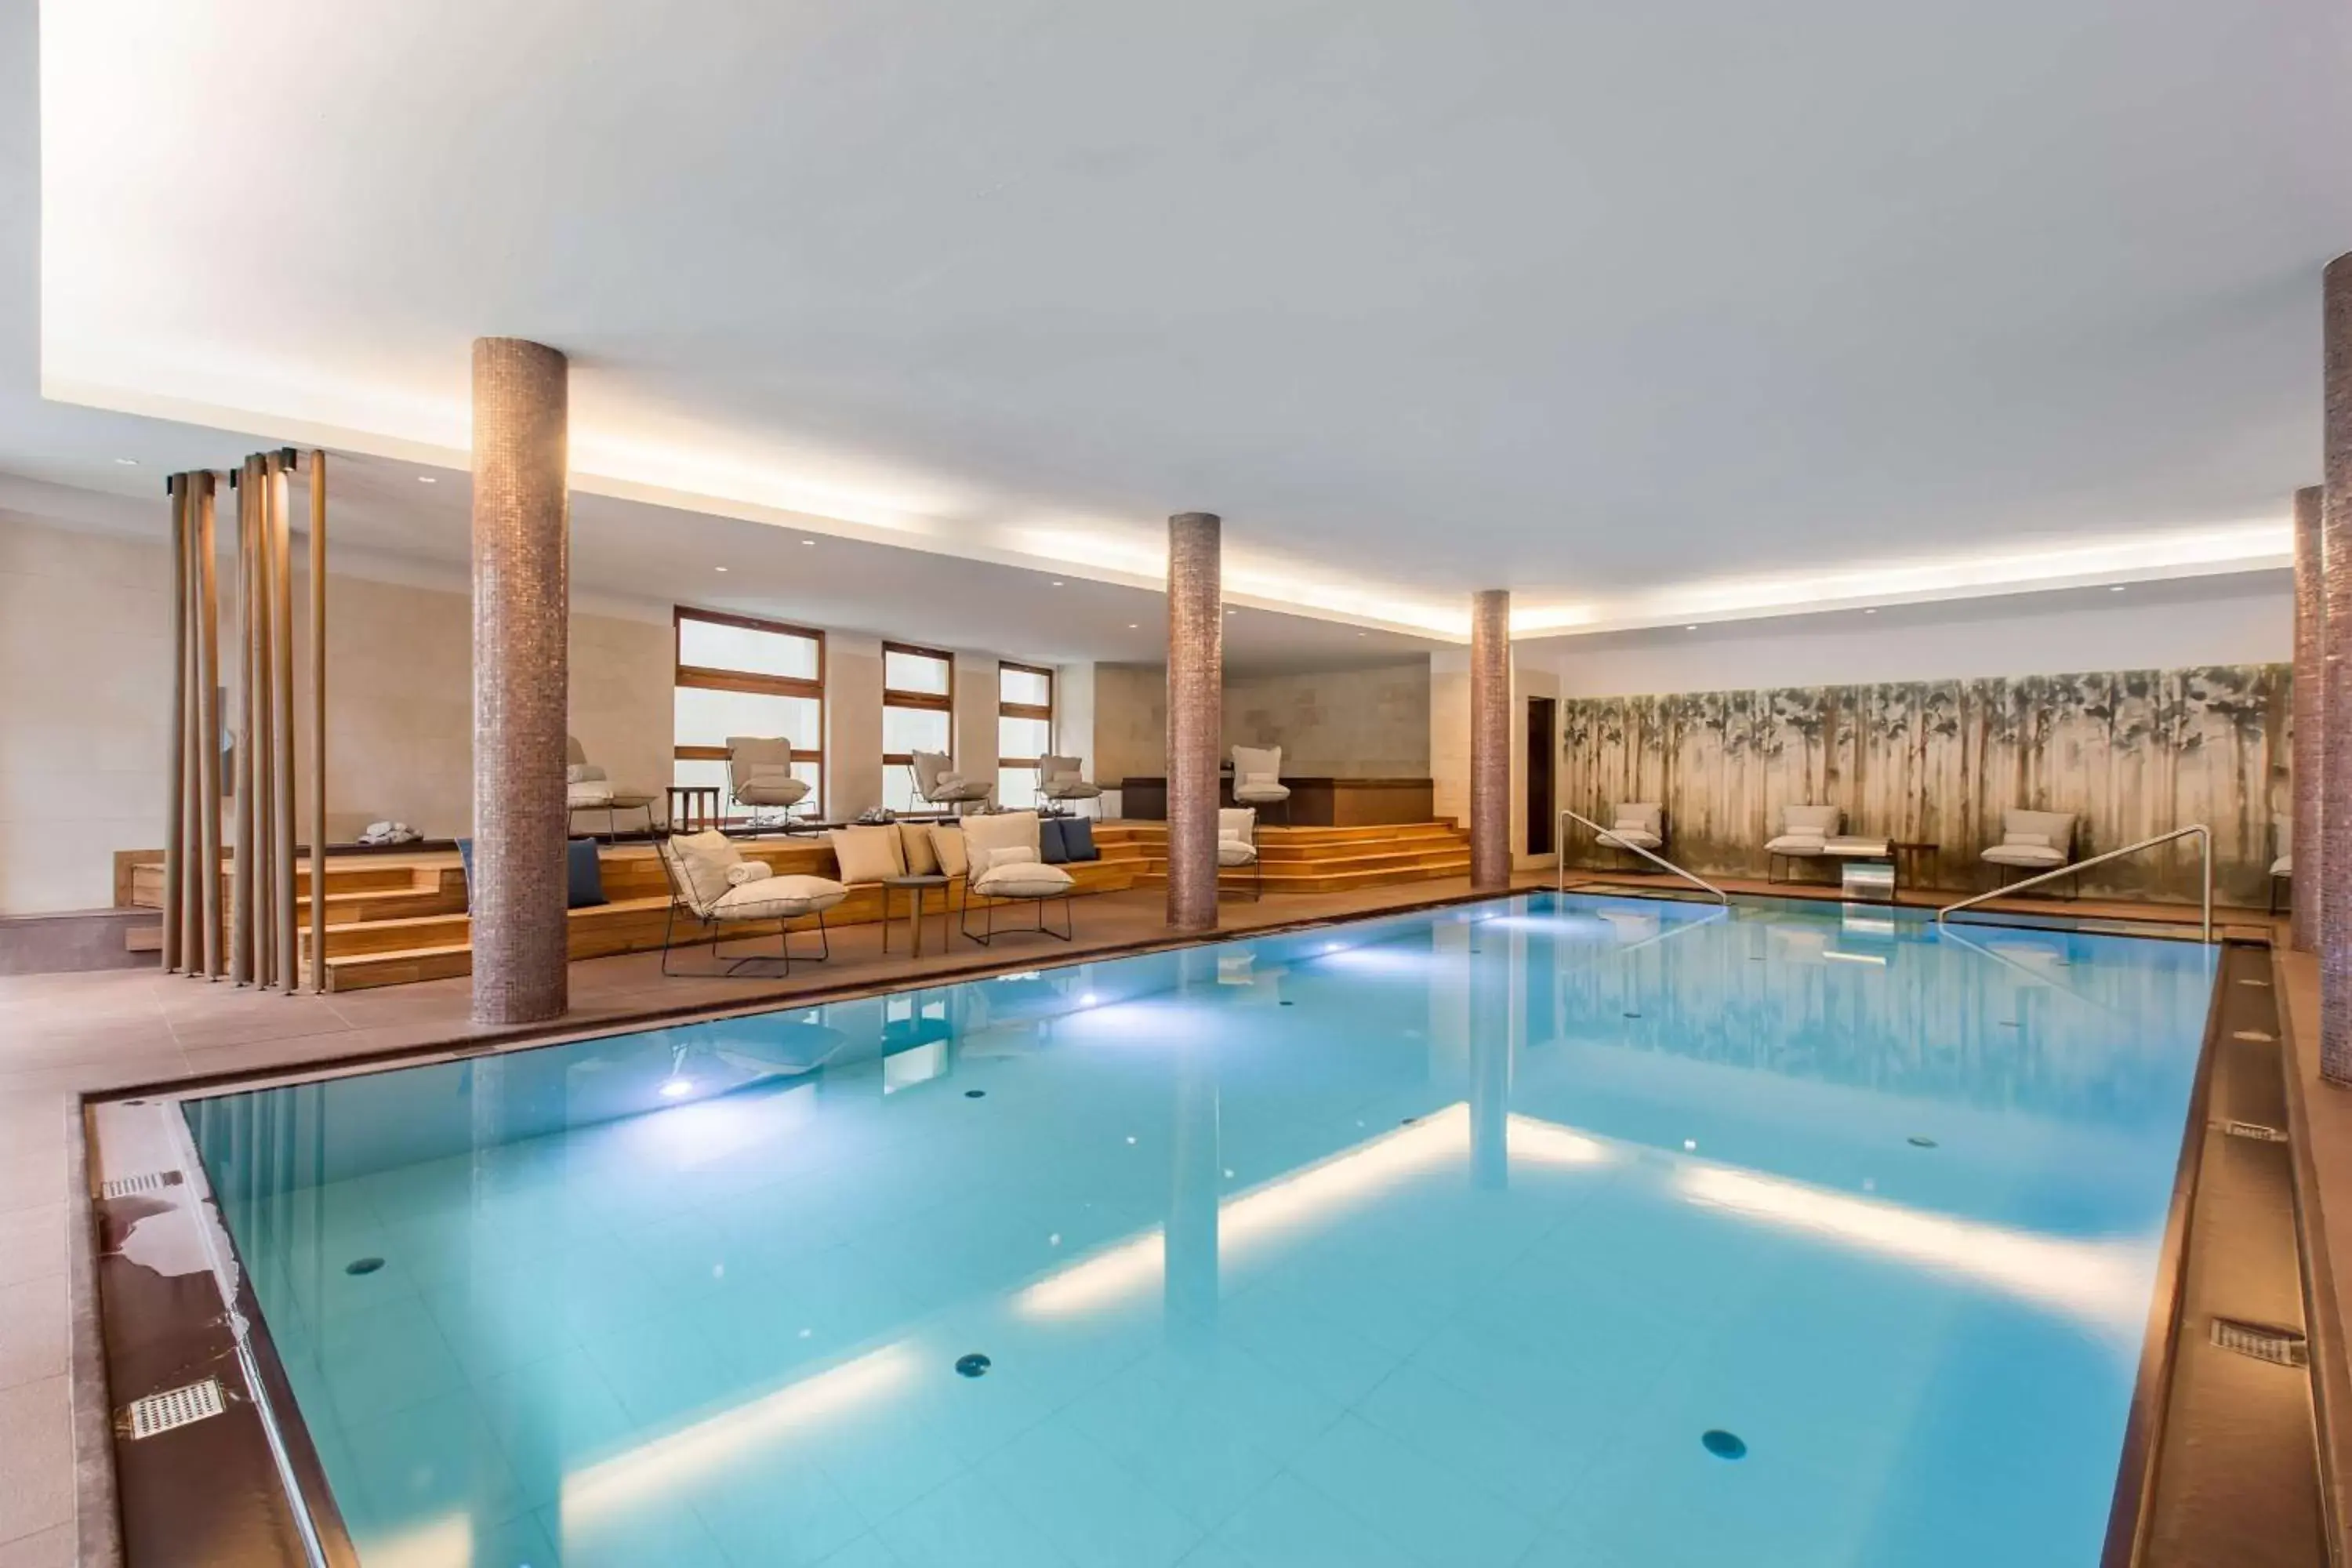 Activities, Swimming Pool in Grand Hotel Savoia Cortina d'Ampezzo, A Radisson Collection Hotel